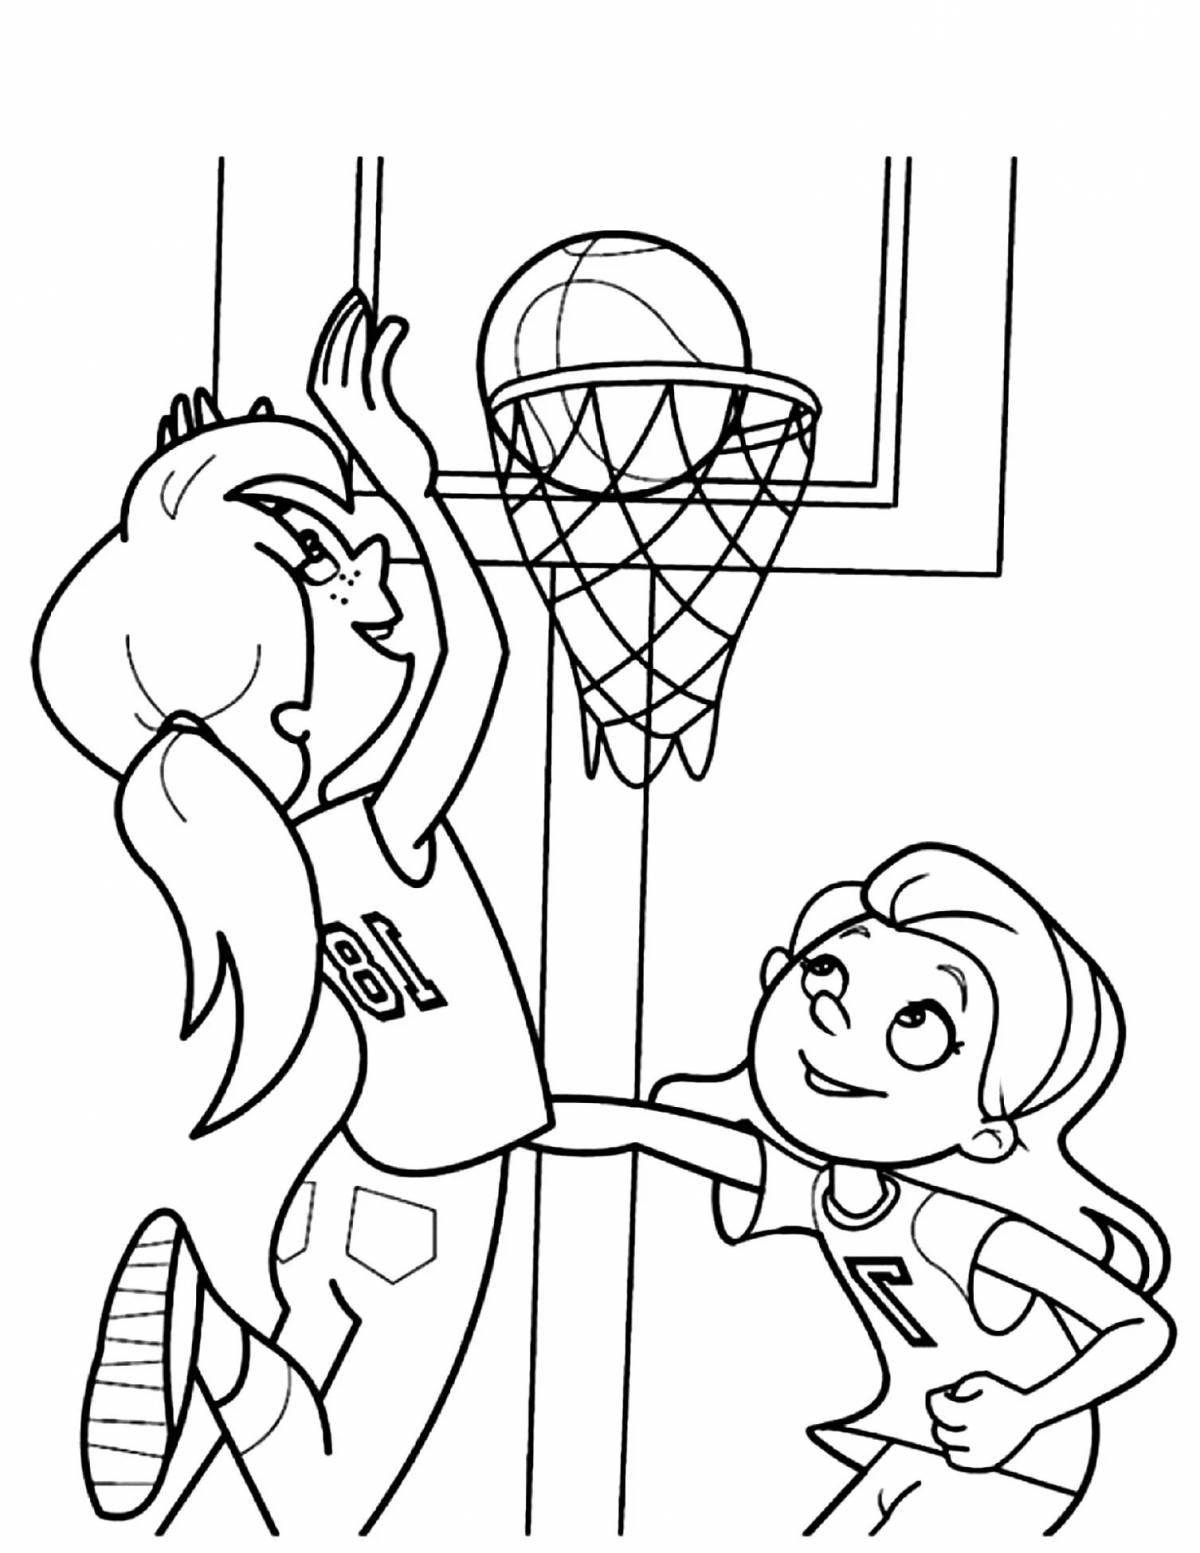 Innovative sports coloring book for kids